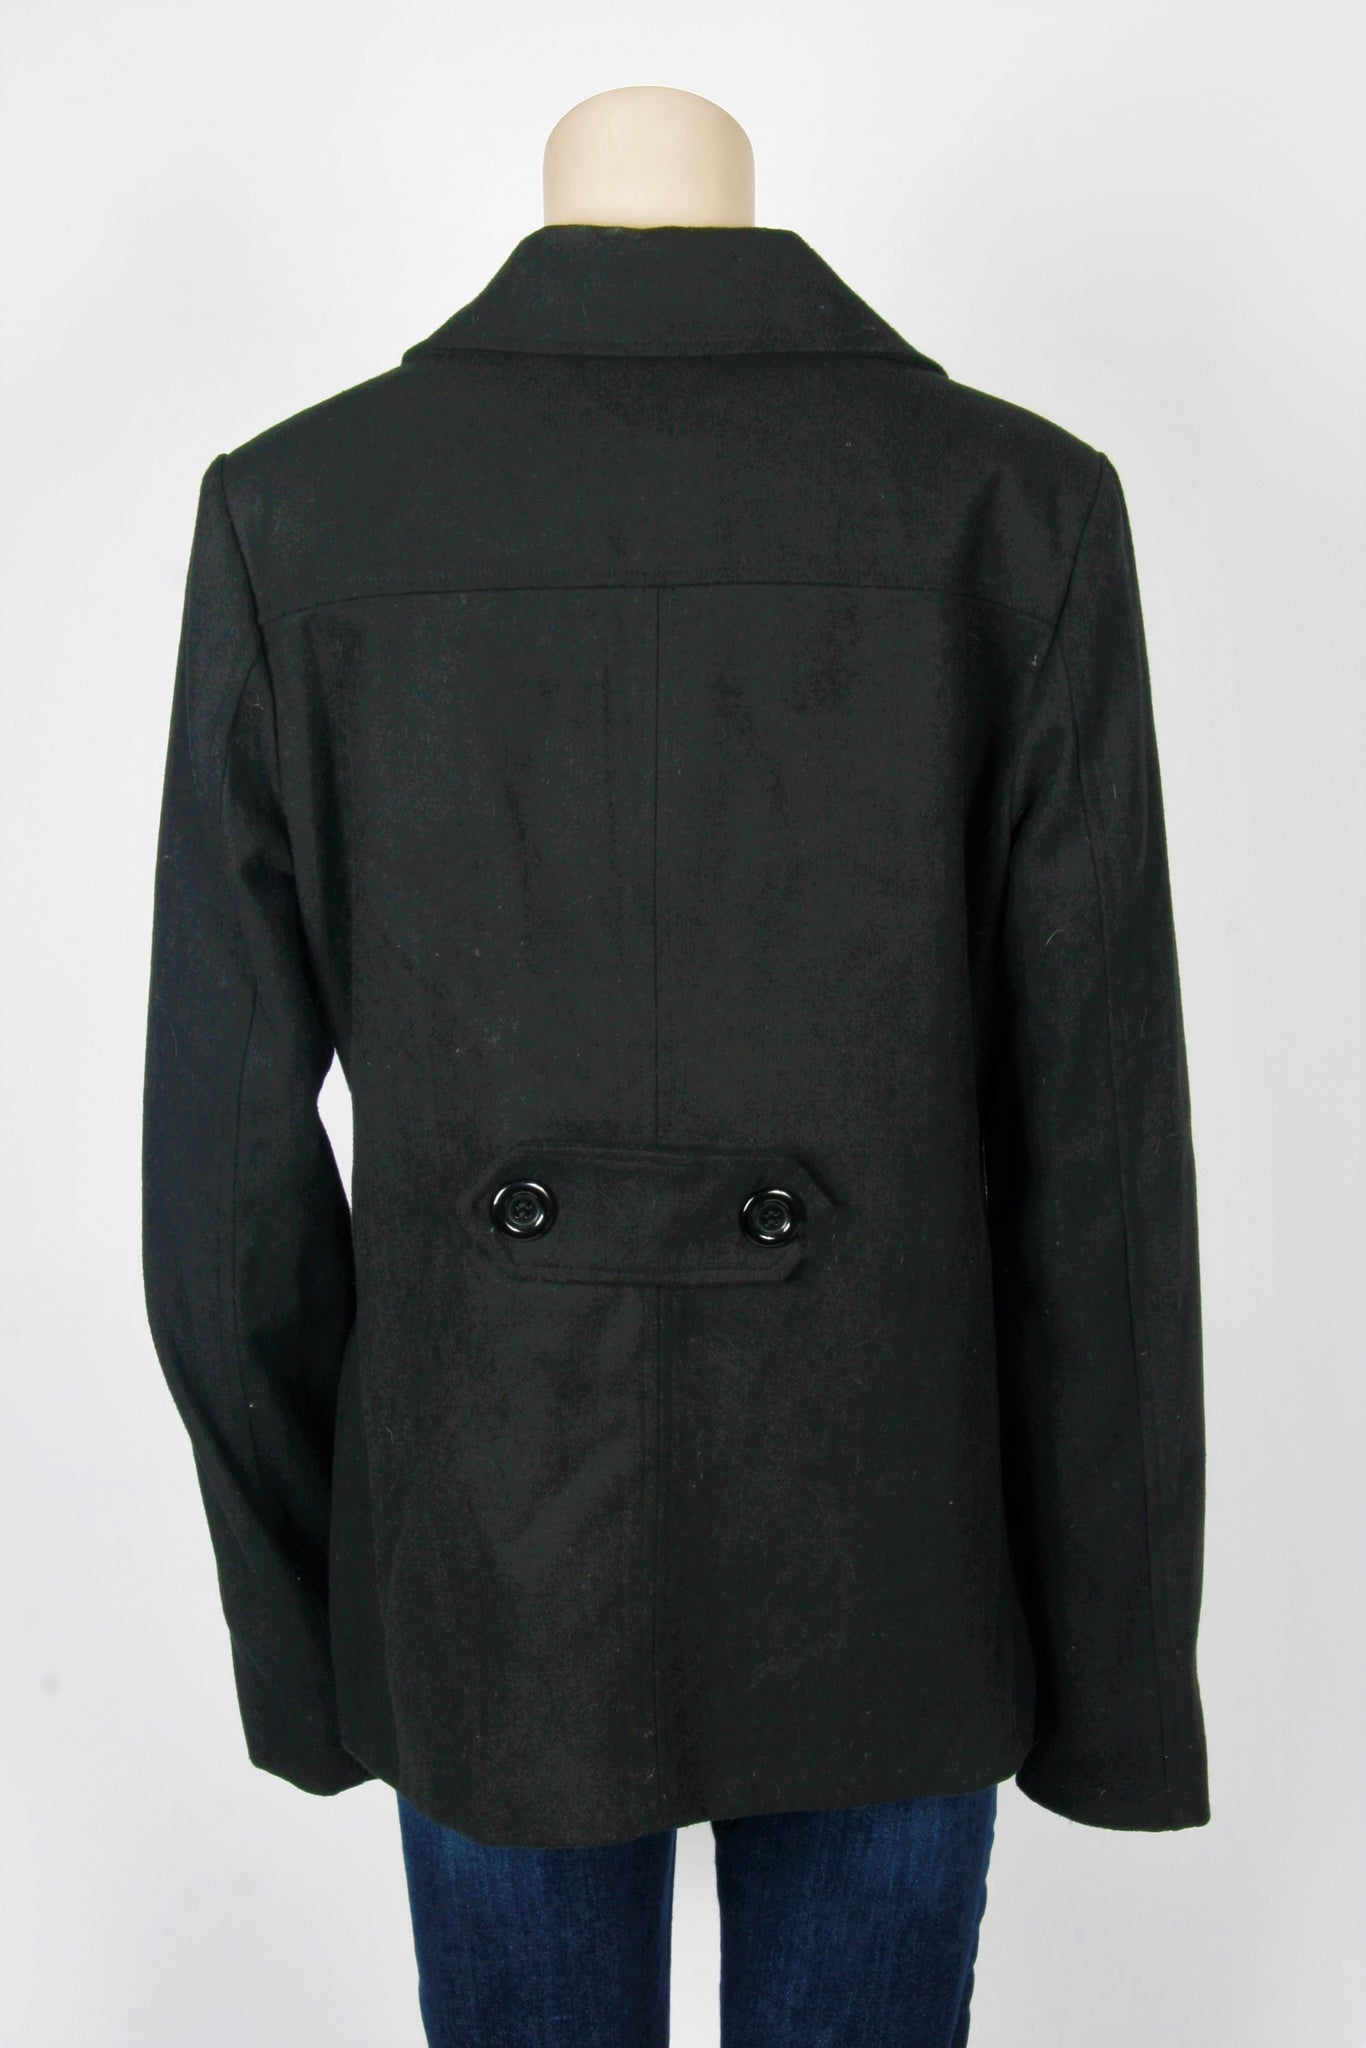 NWOT Ambiance Apparel Black Peacoat-Size Large – Second Bite